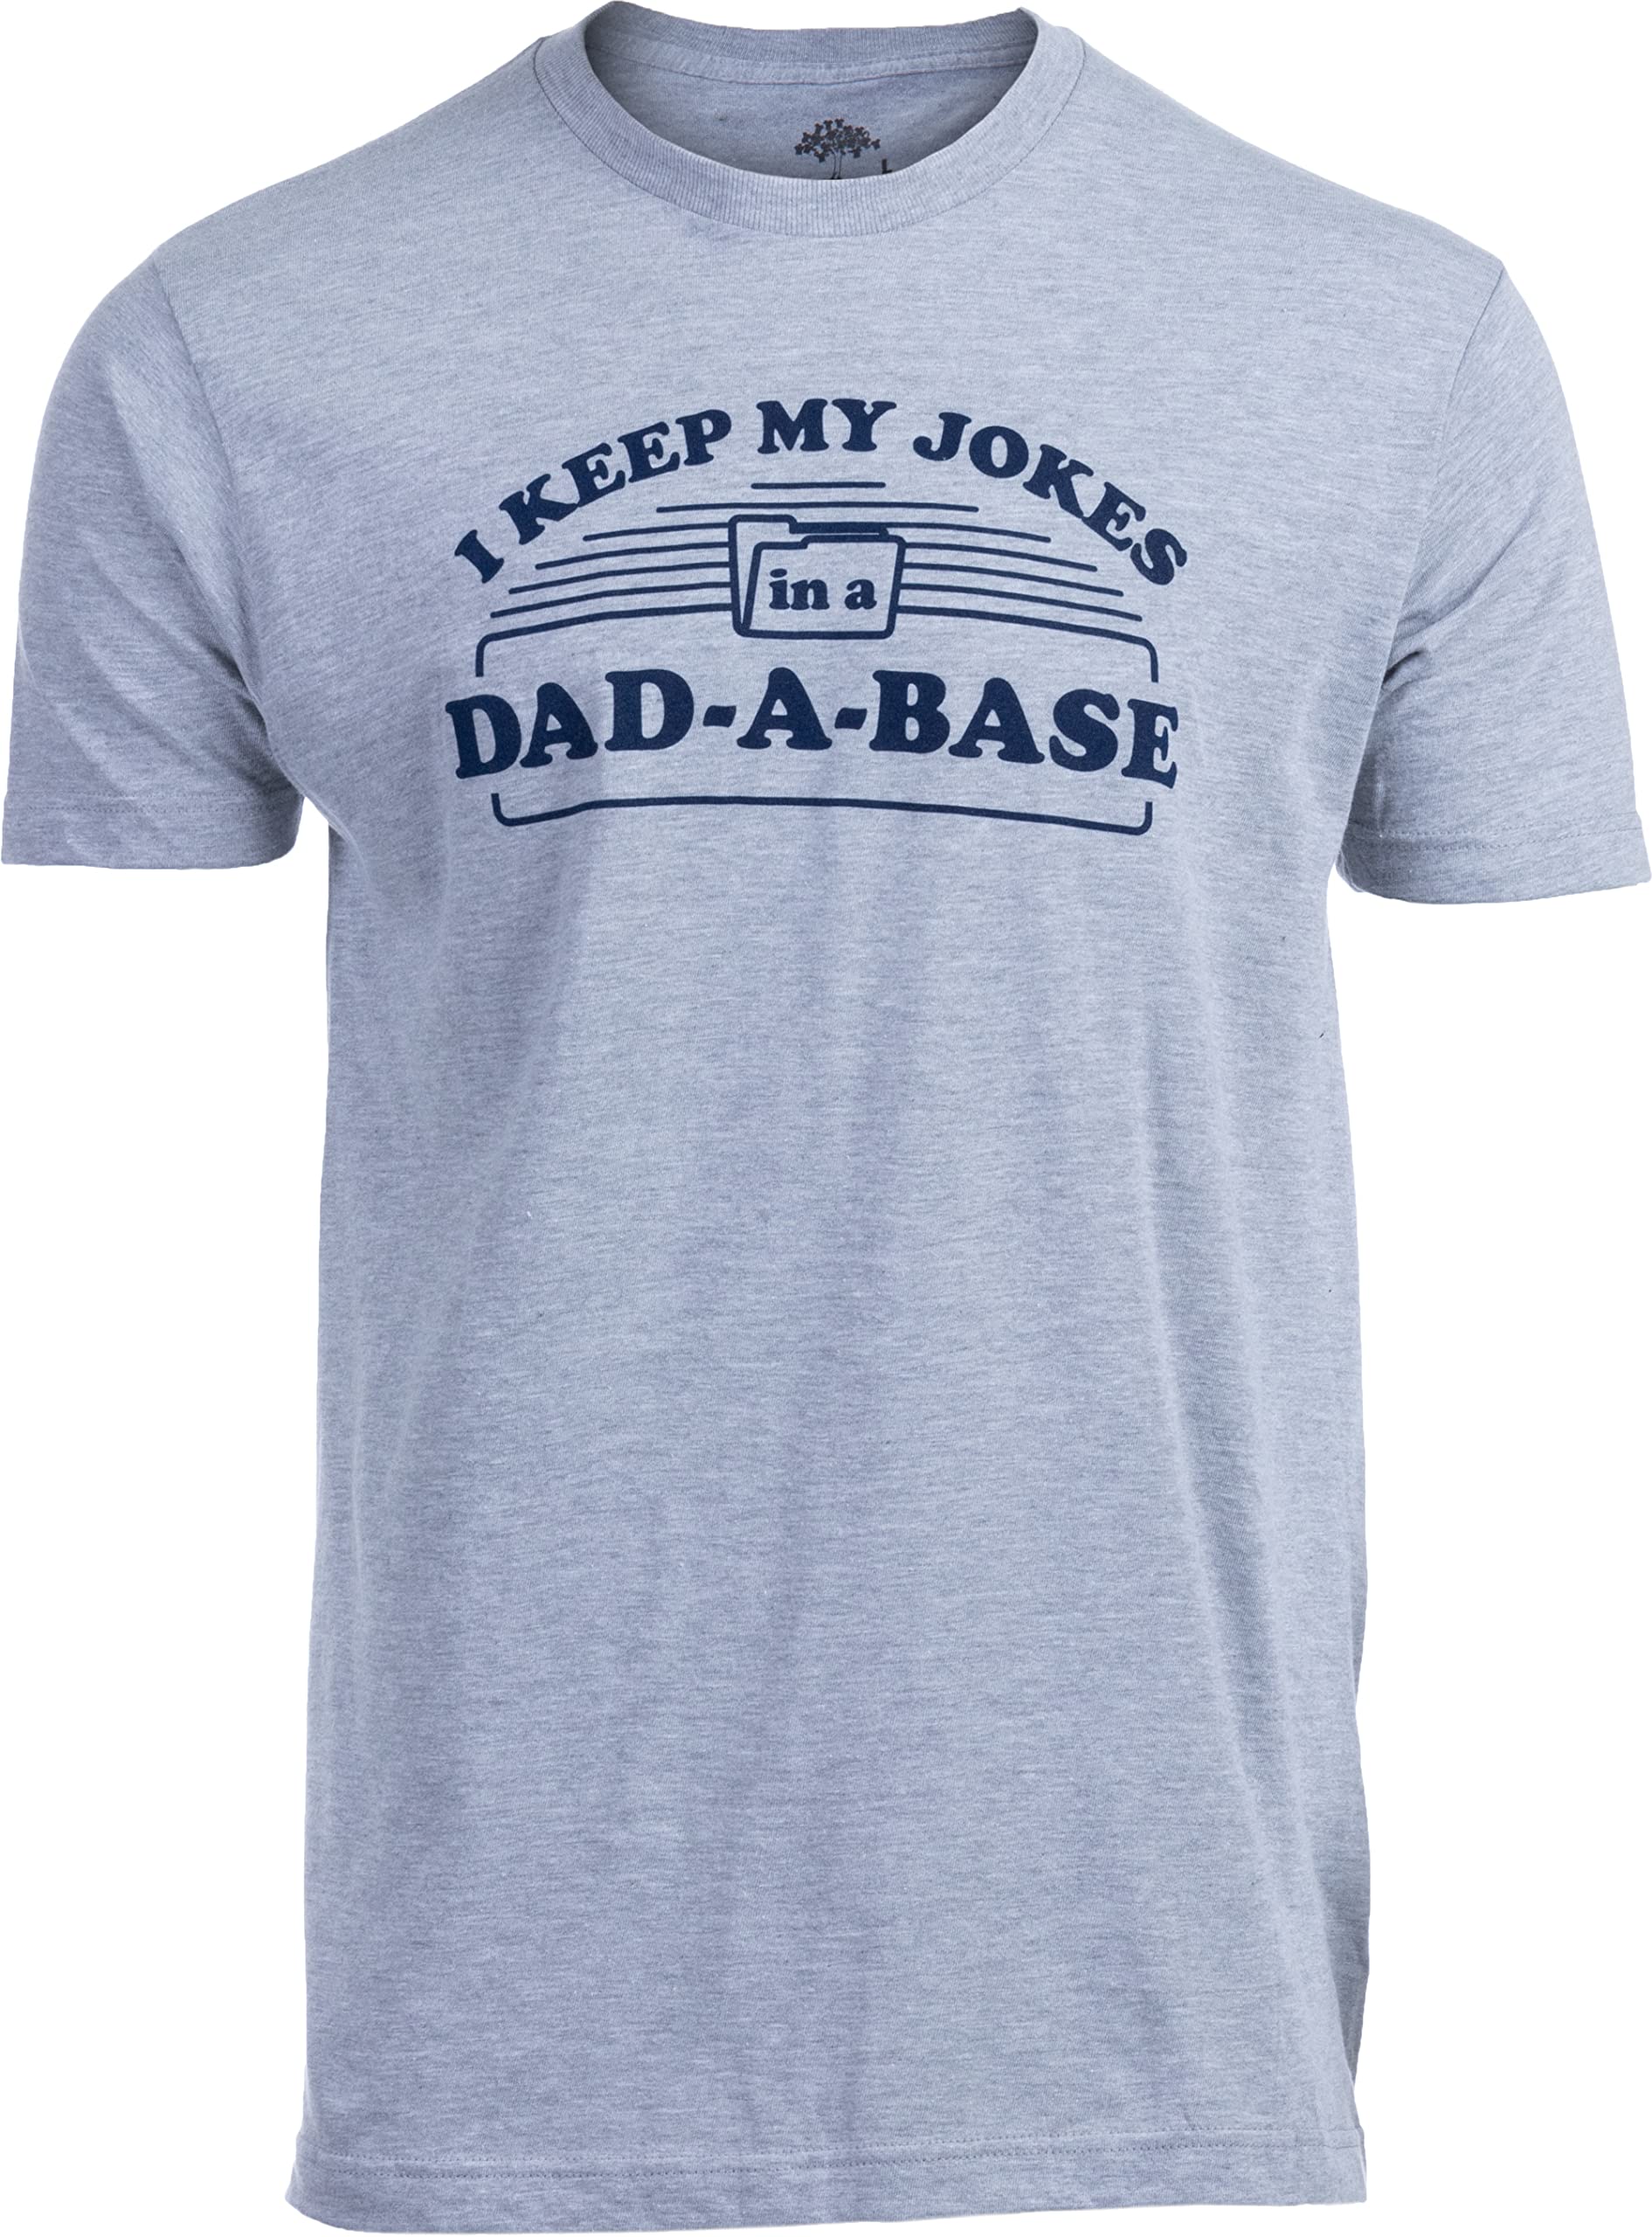 I Keep My Dad Jokes in a Dad-A-Base | Funny Dad Joke Pun Shirt, Grandpa Daddy Base Father's Day Tee T-Shirt